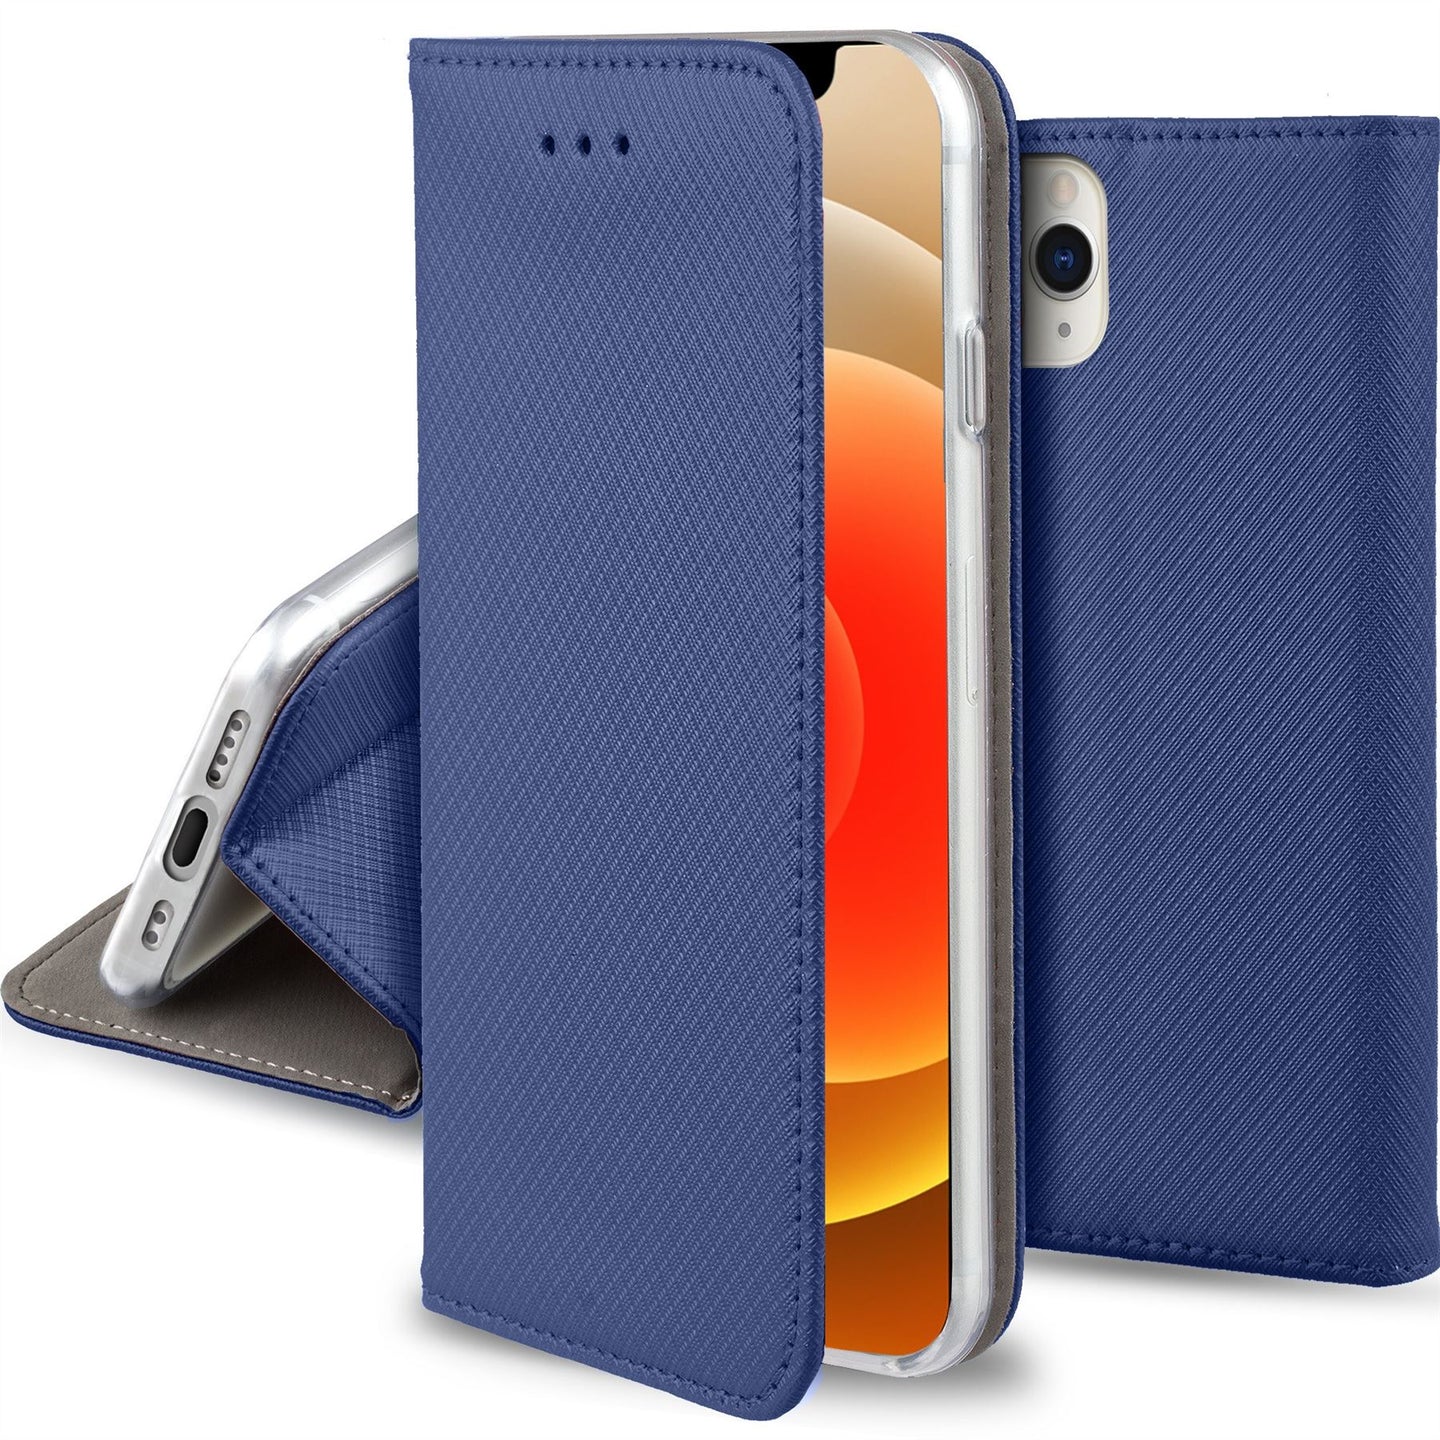 Moozy Case Flip Cover for iPhone 12 Pro Max, Dark Blue - Smart Magnetic Flip Case with Card Holder and Stand